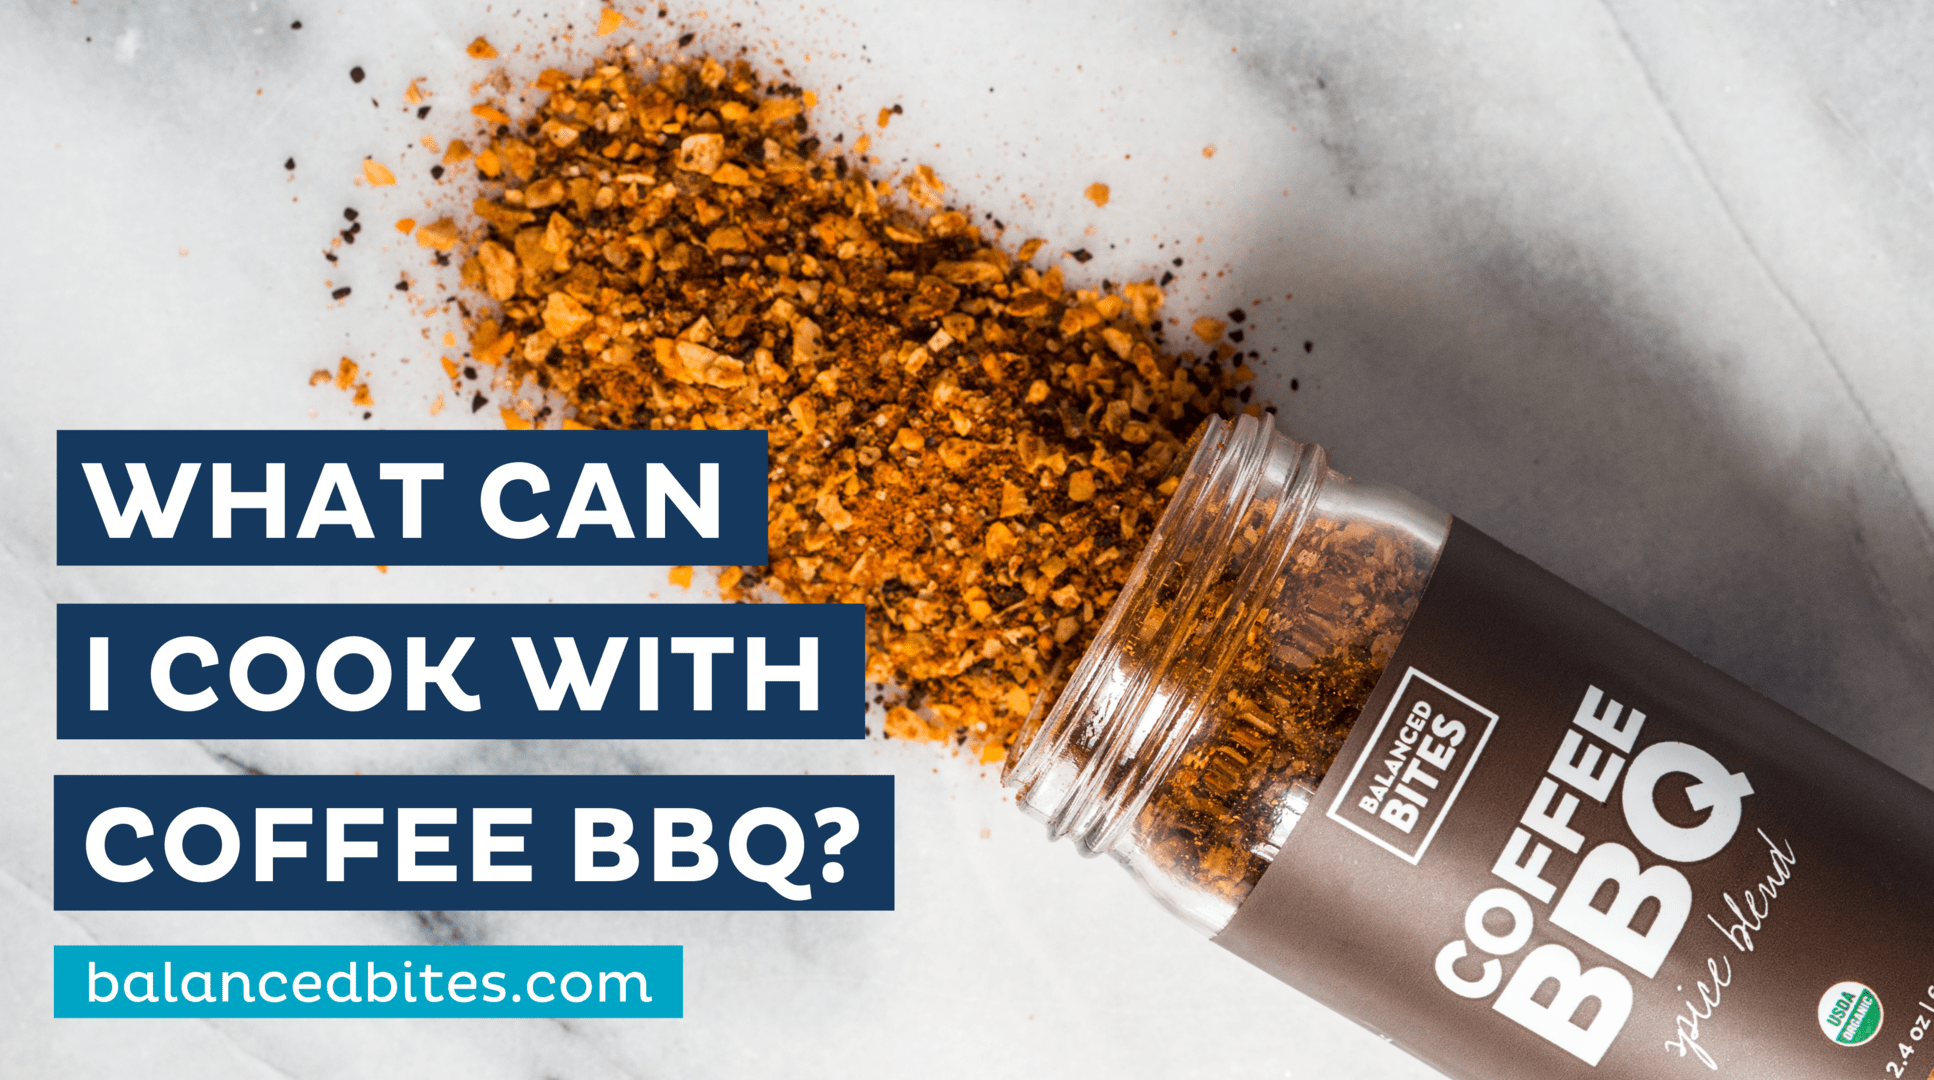 Featured image for “What Can I Cook with COFFEE BBQ Blend?”